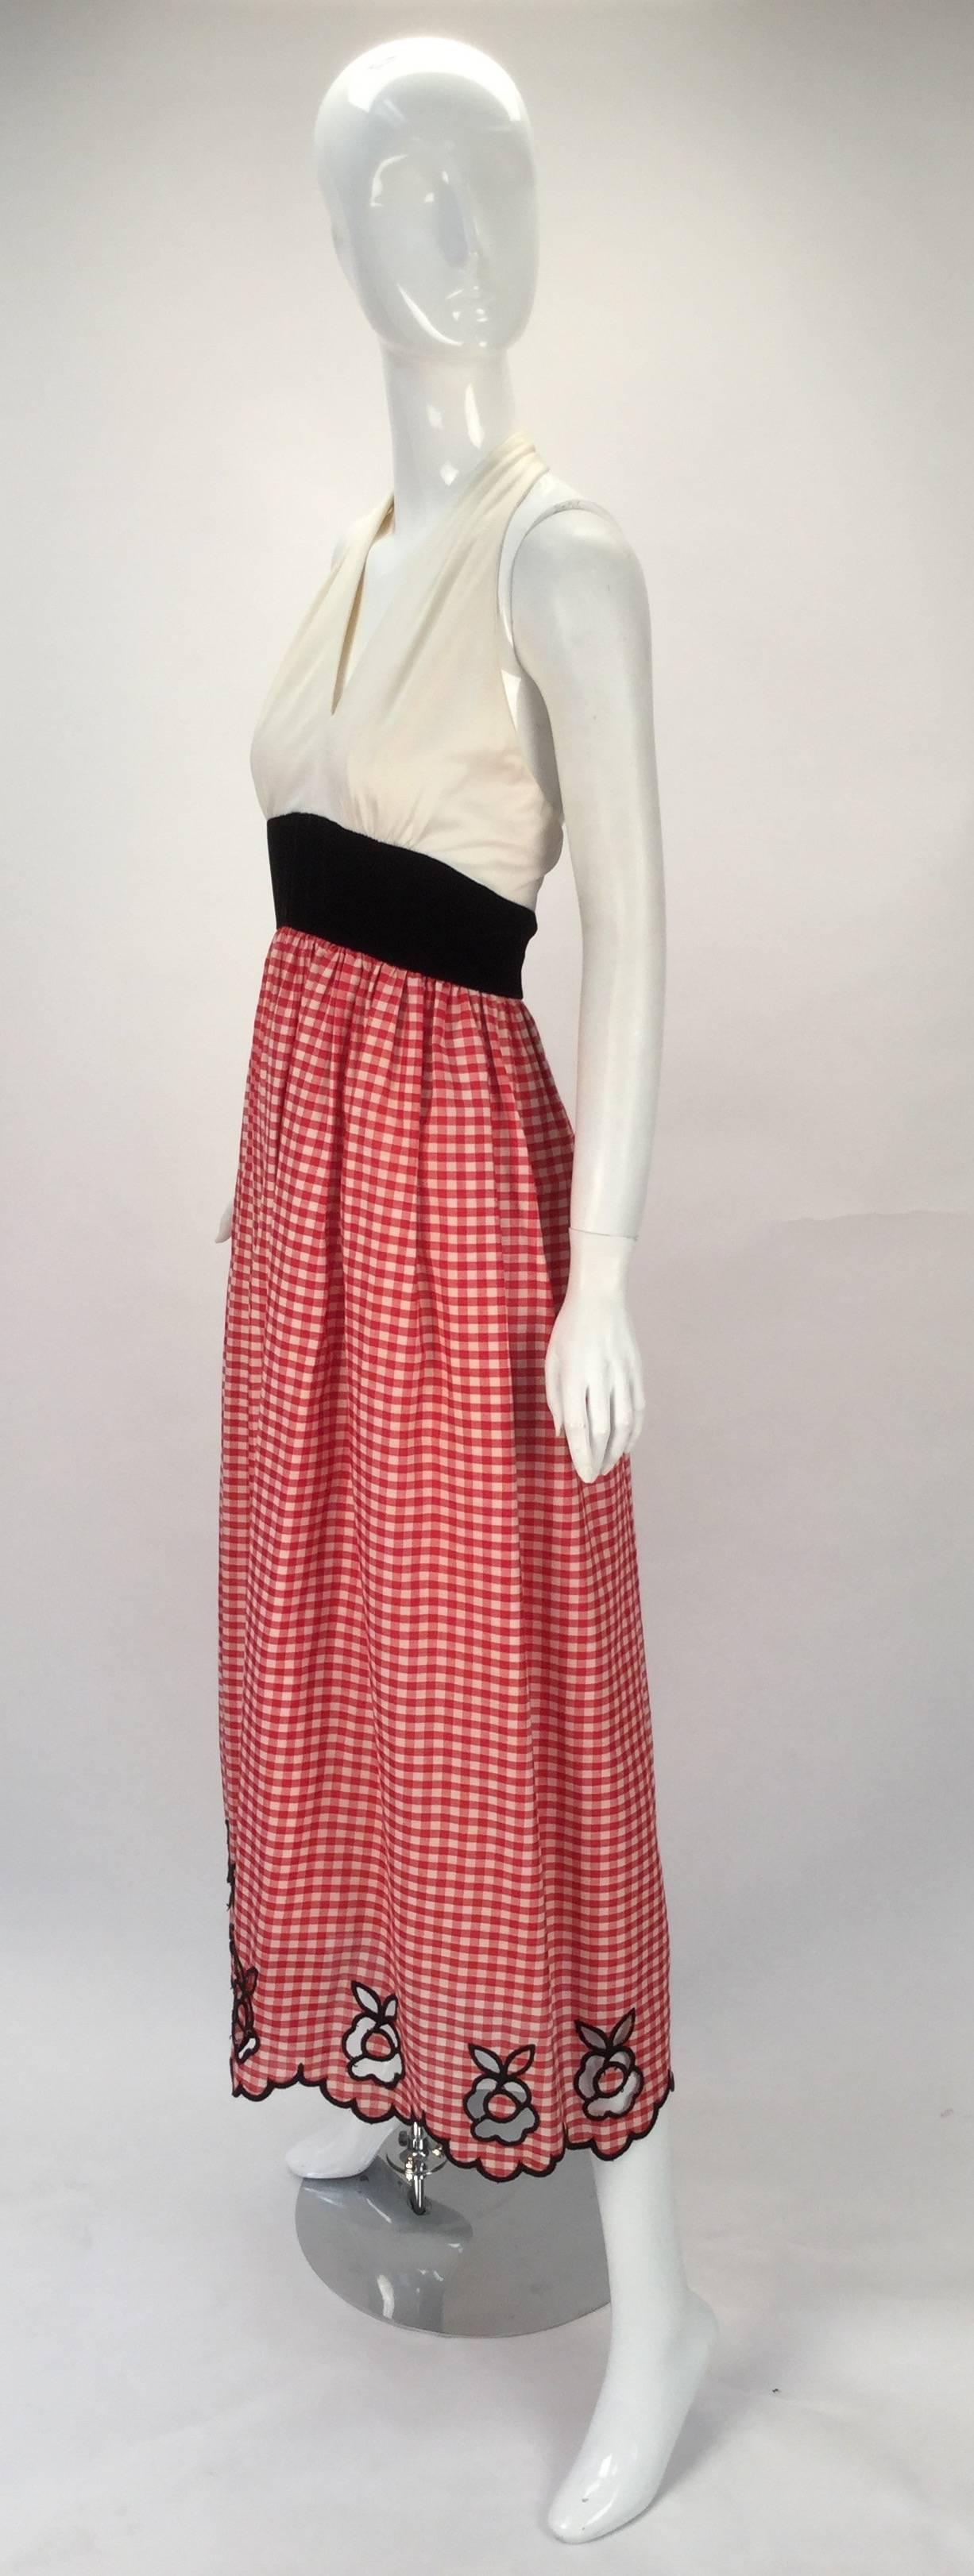 This is a great piece!  We think it must come from the episode where Gilligan's Marrianne forgot she wasn't Ginger -- little sexy with a little innocence added to the design.  

Custom made 1970's halter dress with red and white gingham print